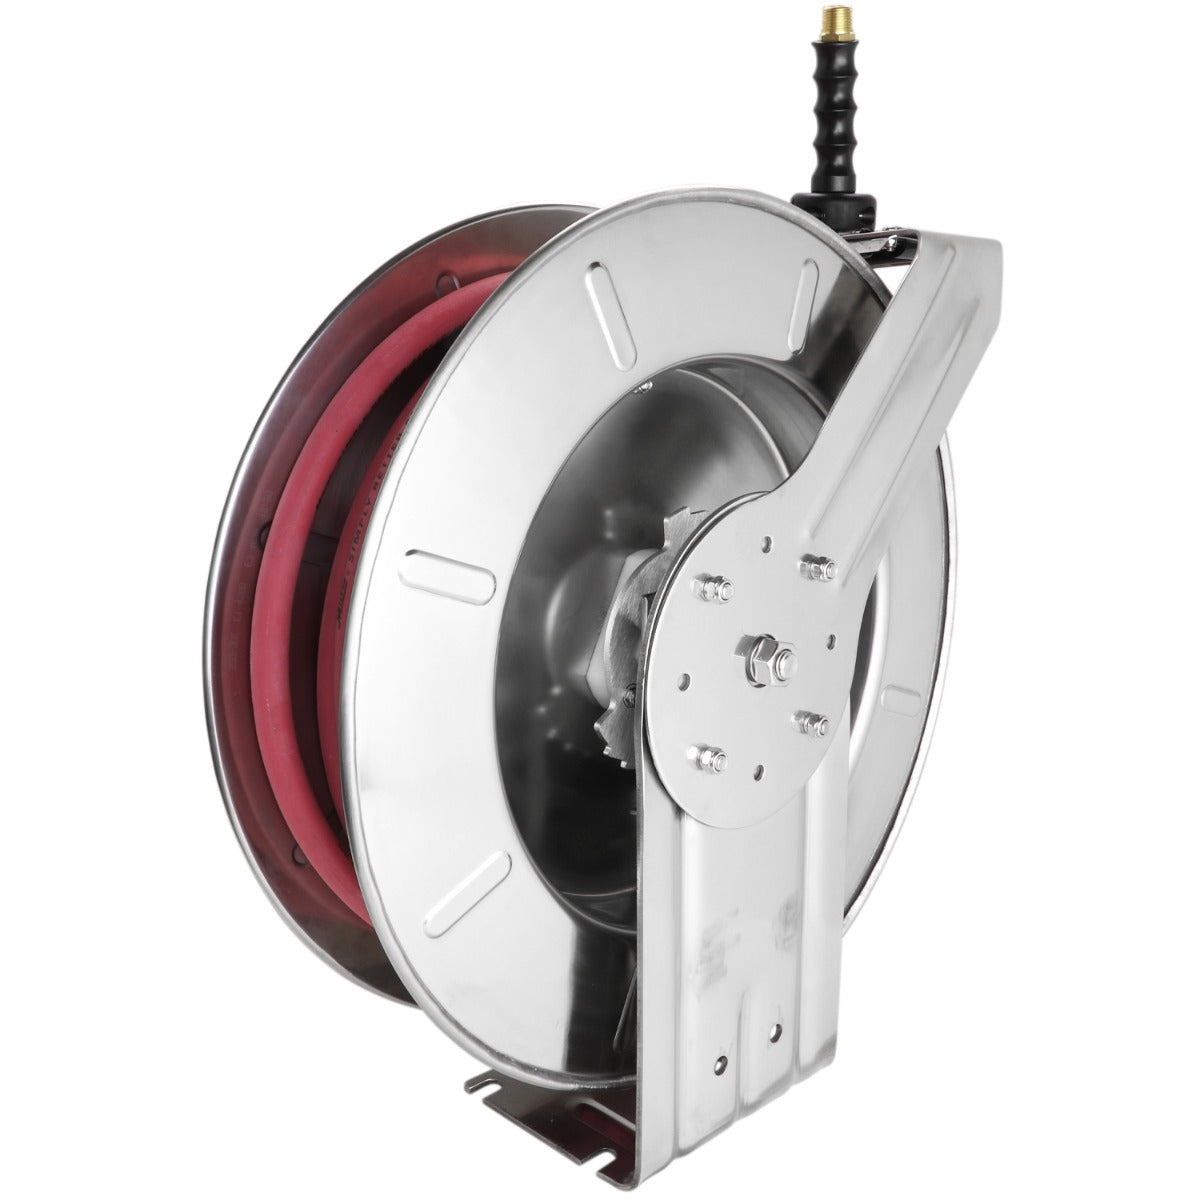 Milton Stainless Steel Hose Reel Retractable, 1/2 ID x 35' Ultra